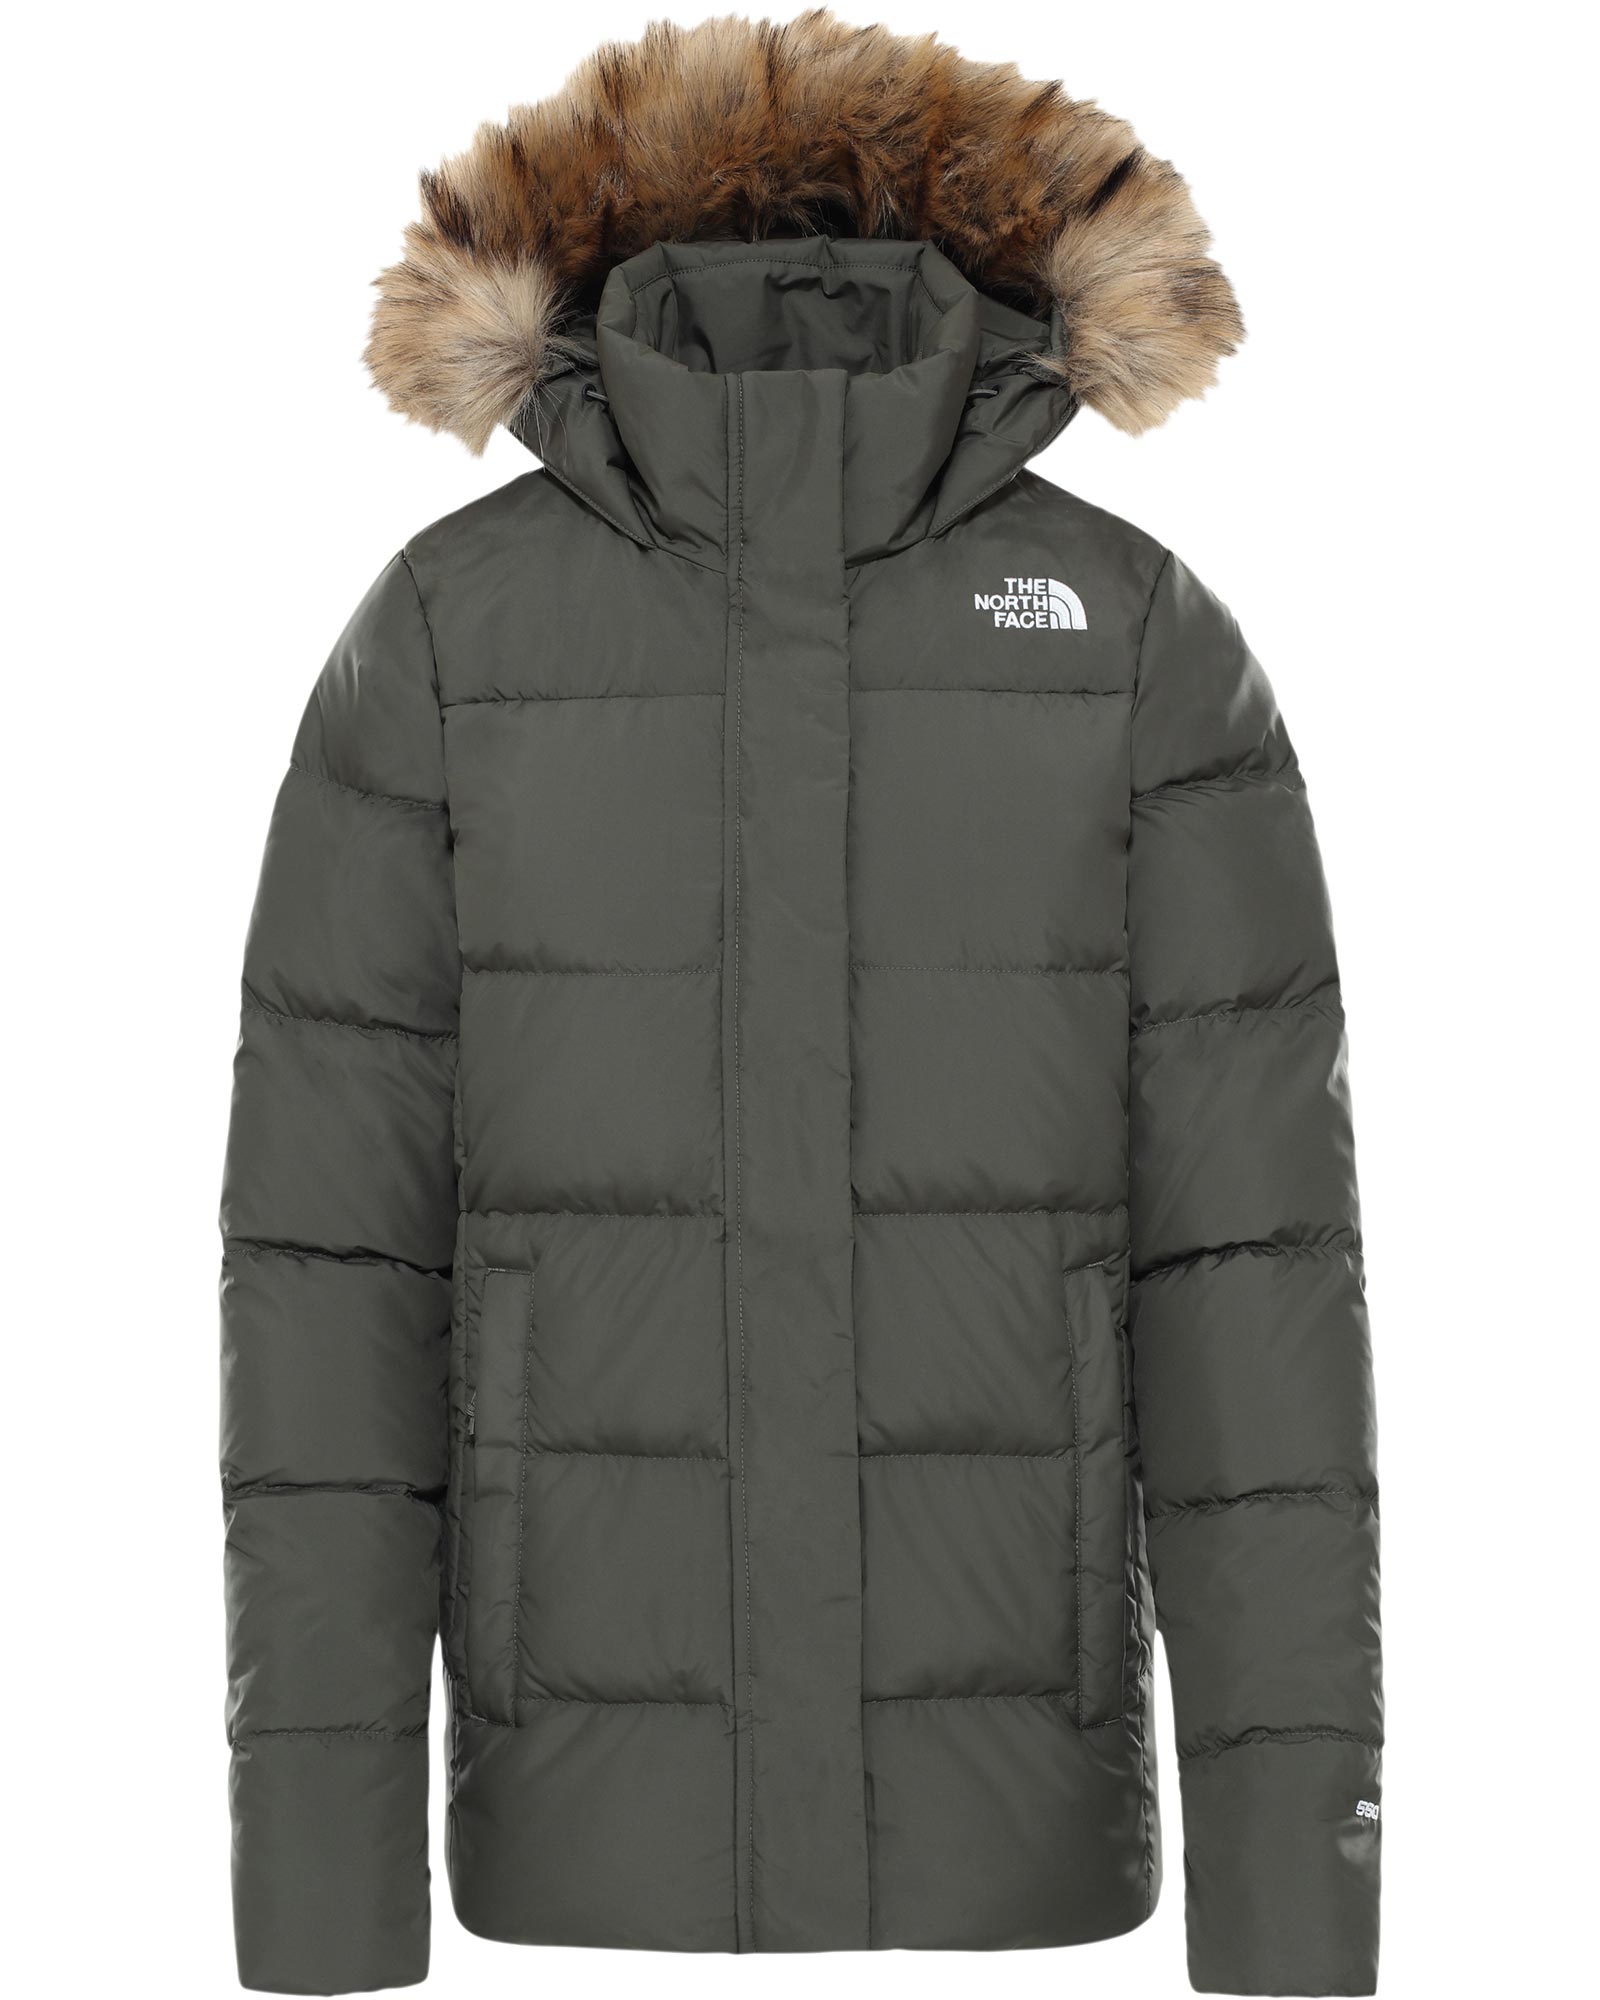 The North Face Gotham Womens Jacket